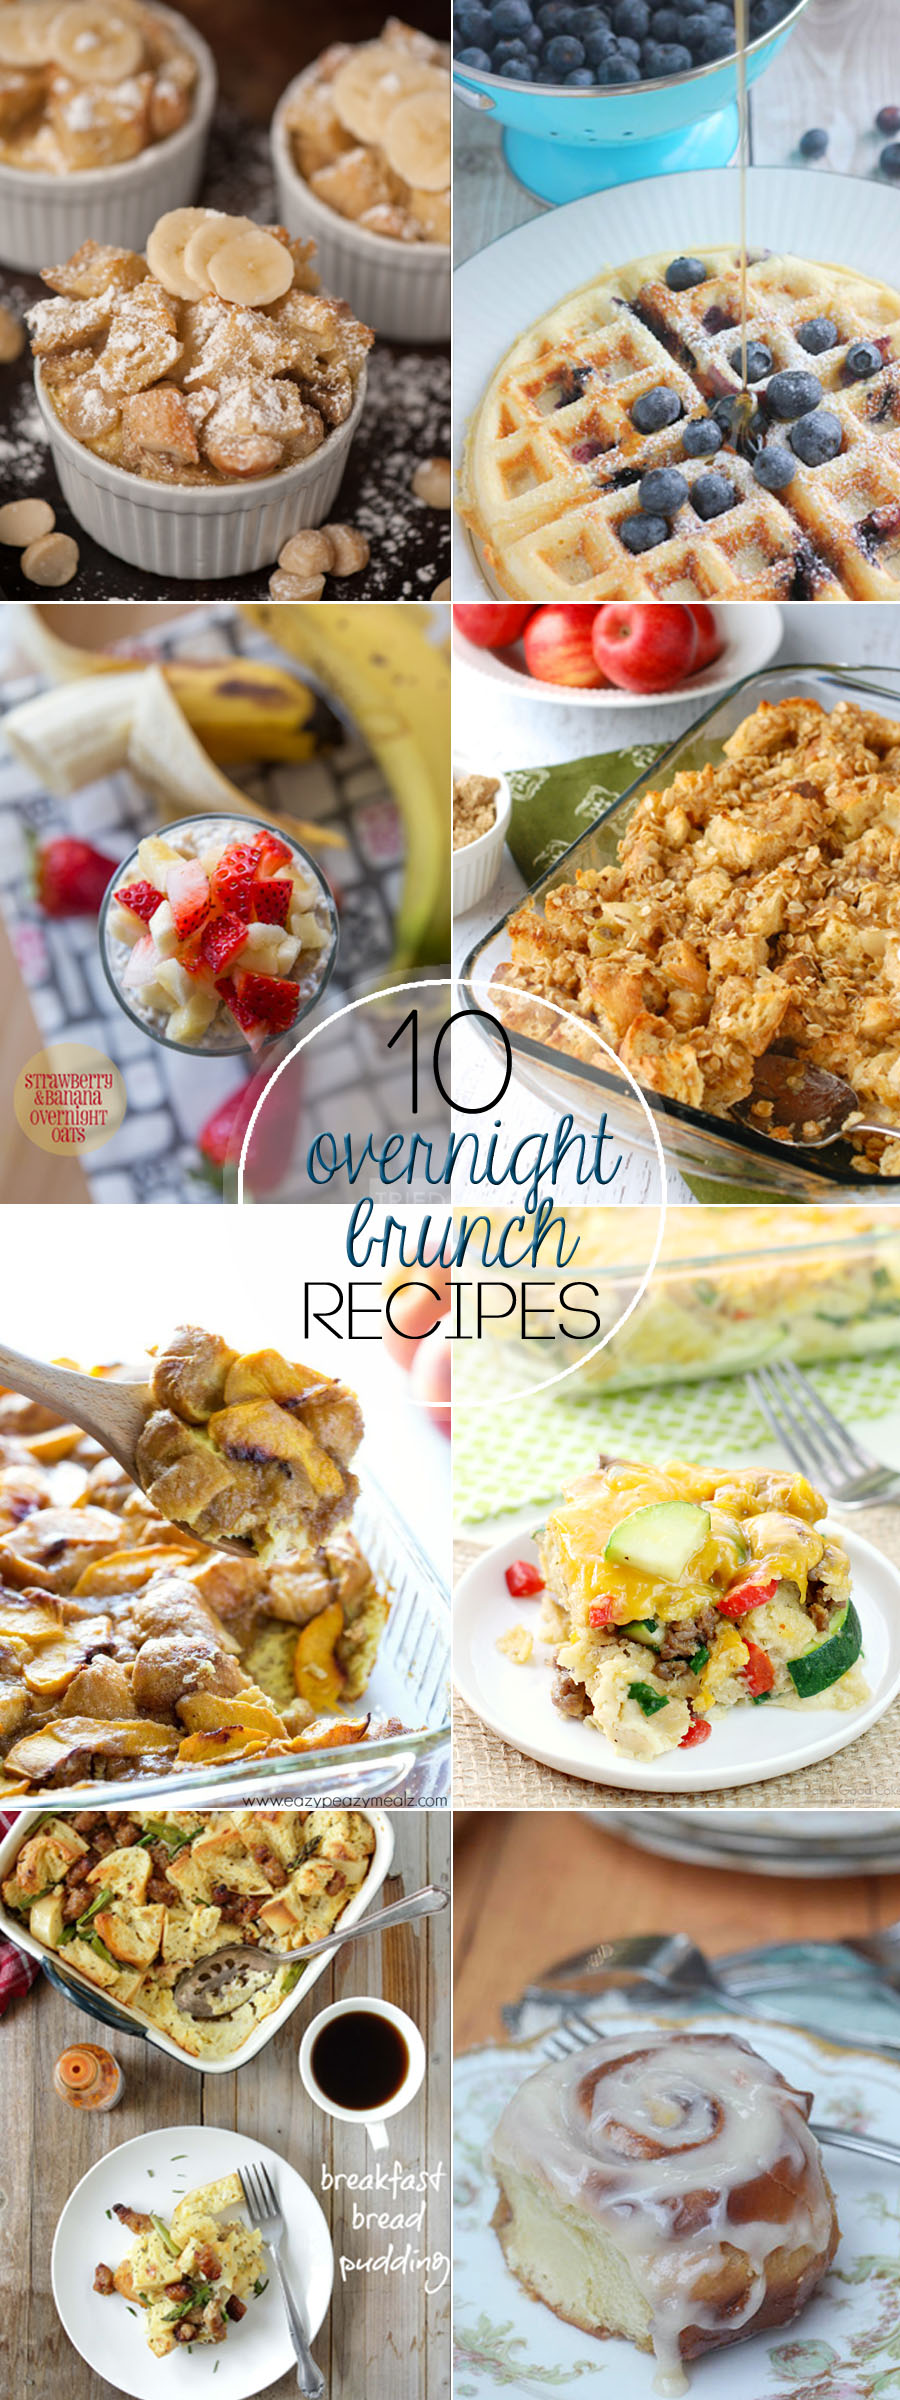 Is there anything better than waking up in the morning to an amazing breakfast that cooked all night long? I love these 10 Overnight Brunch recipes....they are definitely some of my family's favorites! 